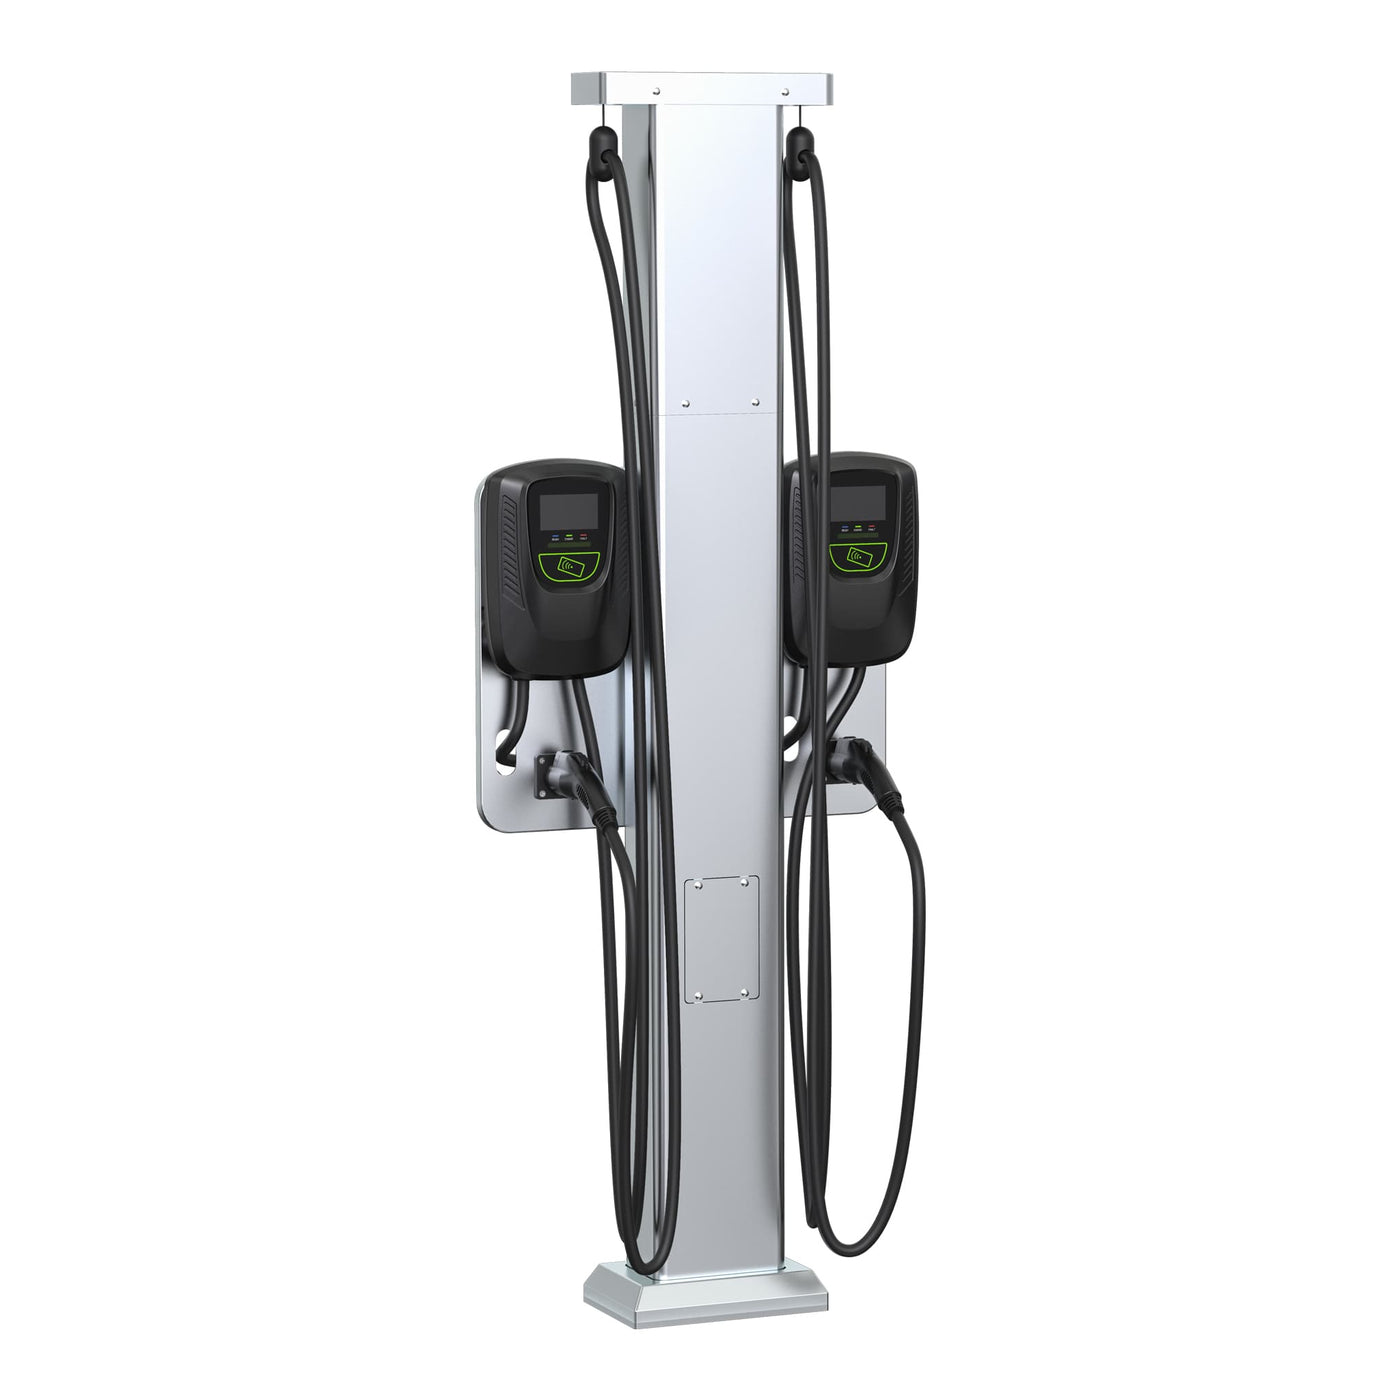 Hwisel EV Smart Charger Commercial Level 2 48 amp x2 with Stand 2 Image Size 2040x2040